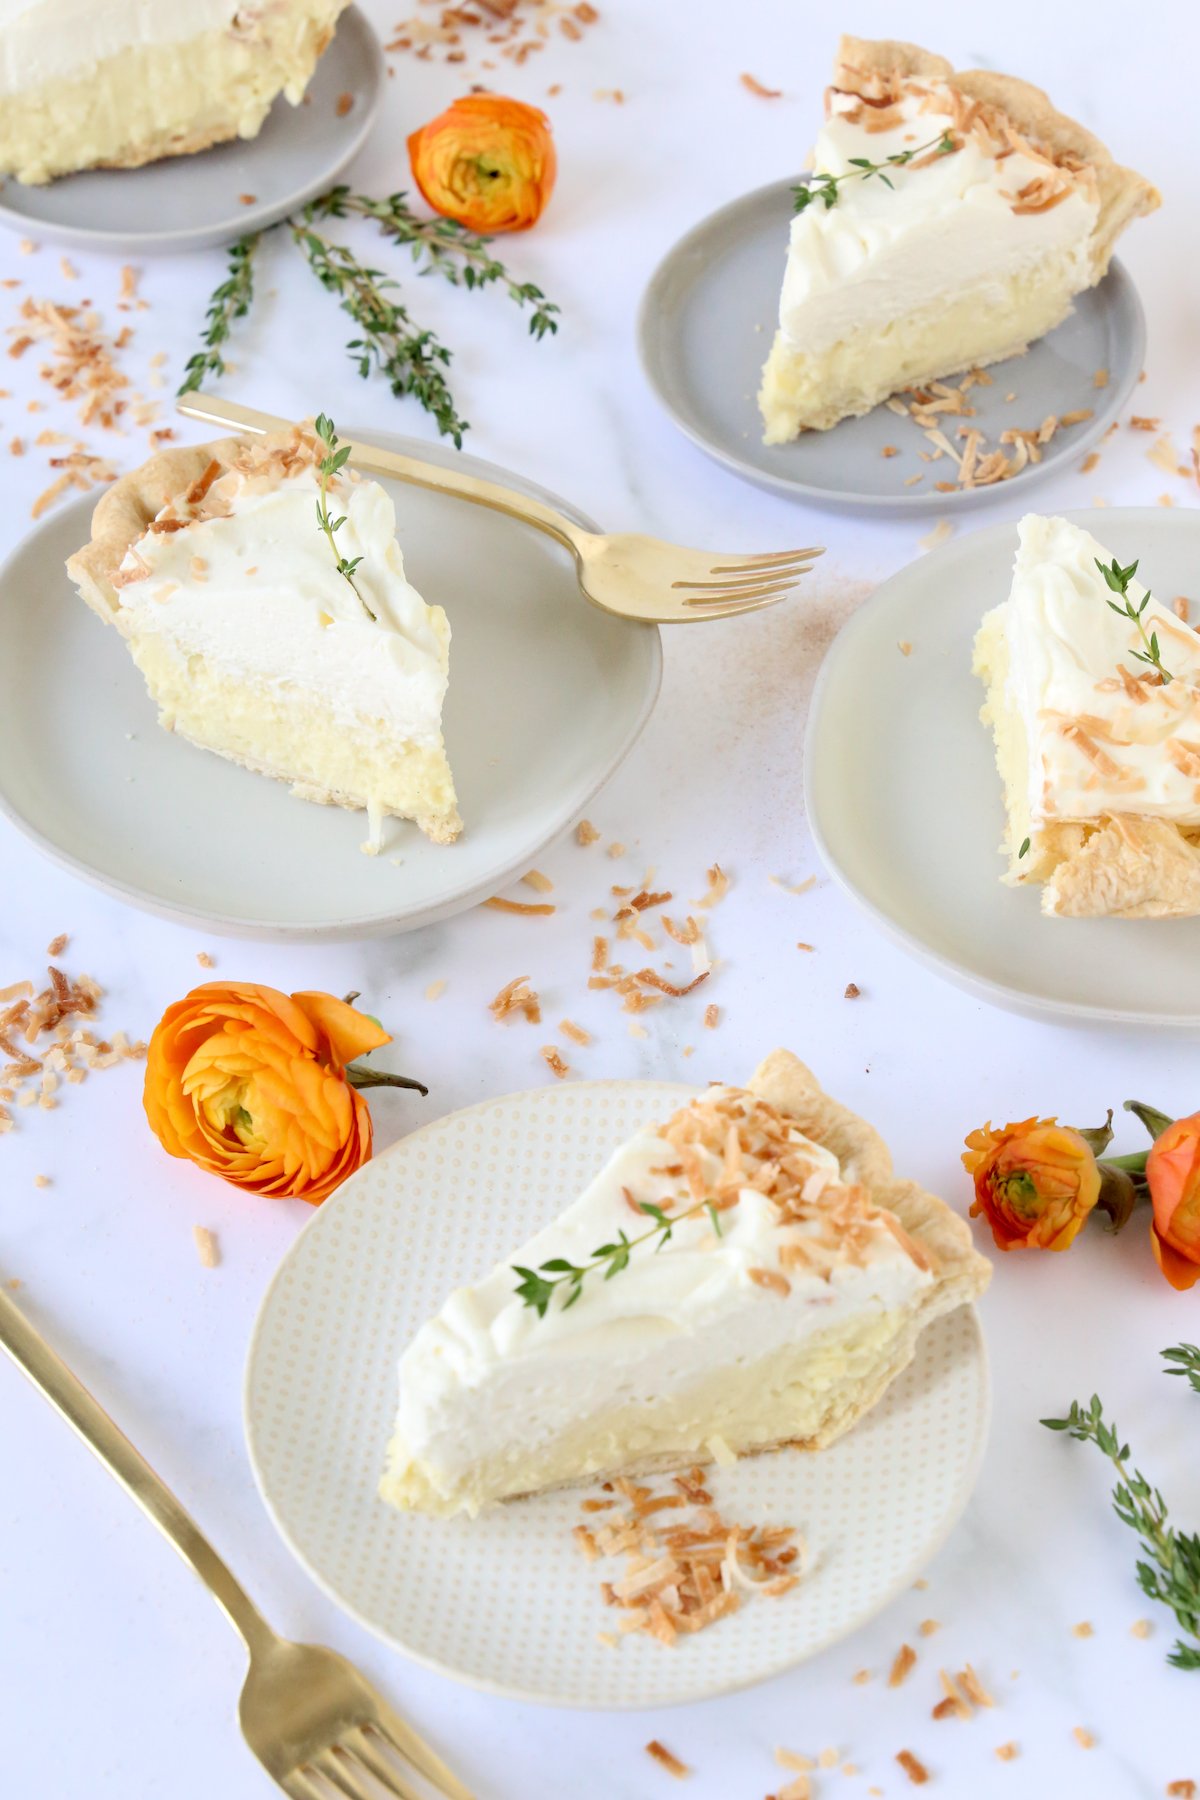 Four slices of pie sprinkled with toasted coconut and fresh flowers.  